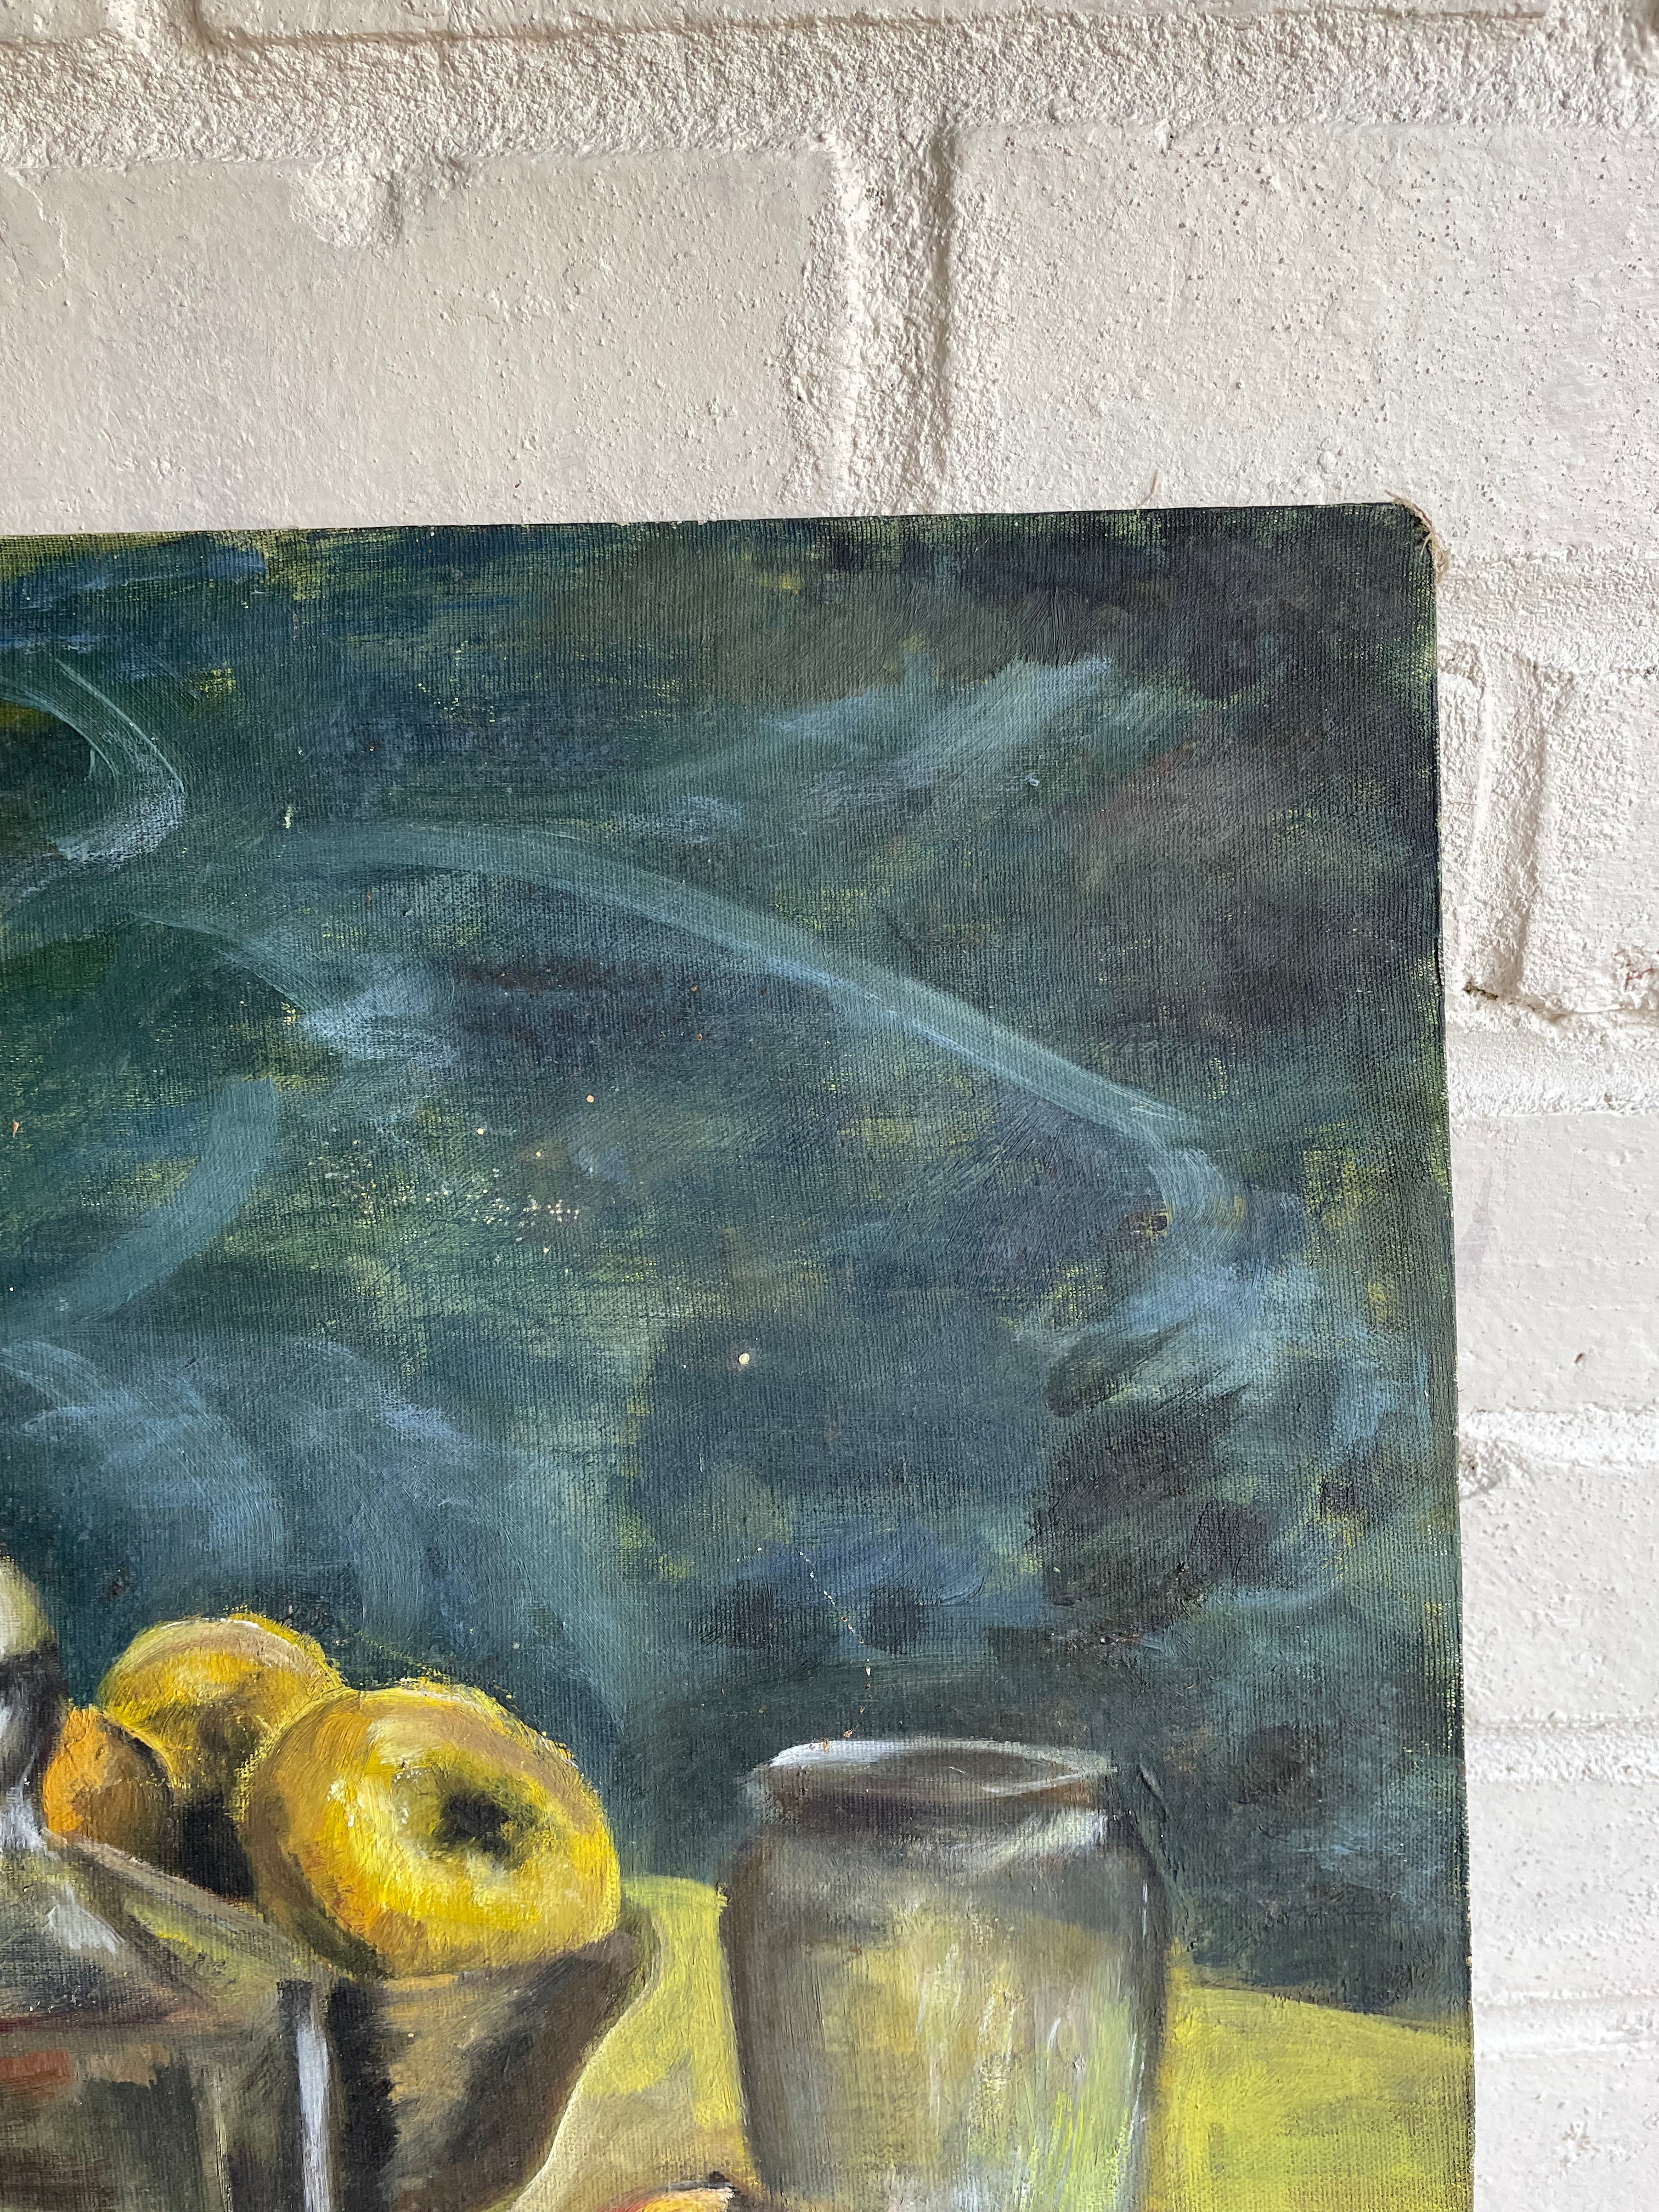 Still life with apples: Oil on Hessian and Board